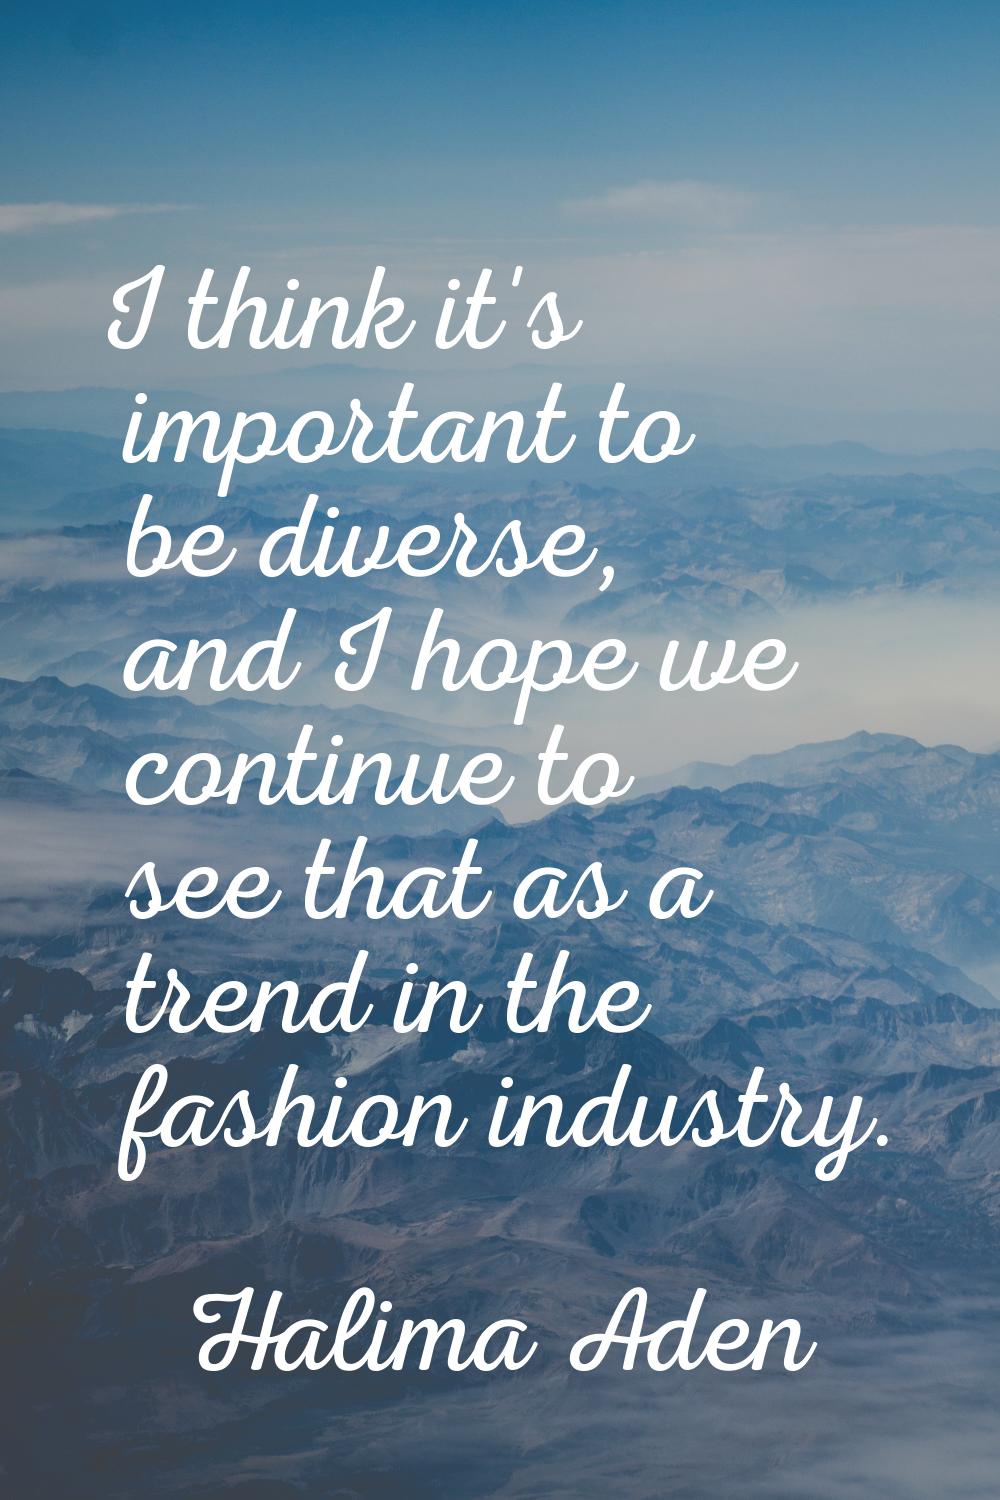 I think it's important to be diverse, and I hope we continue to see that as a trend in the fashion 